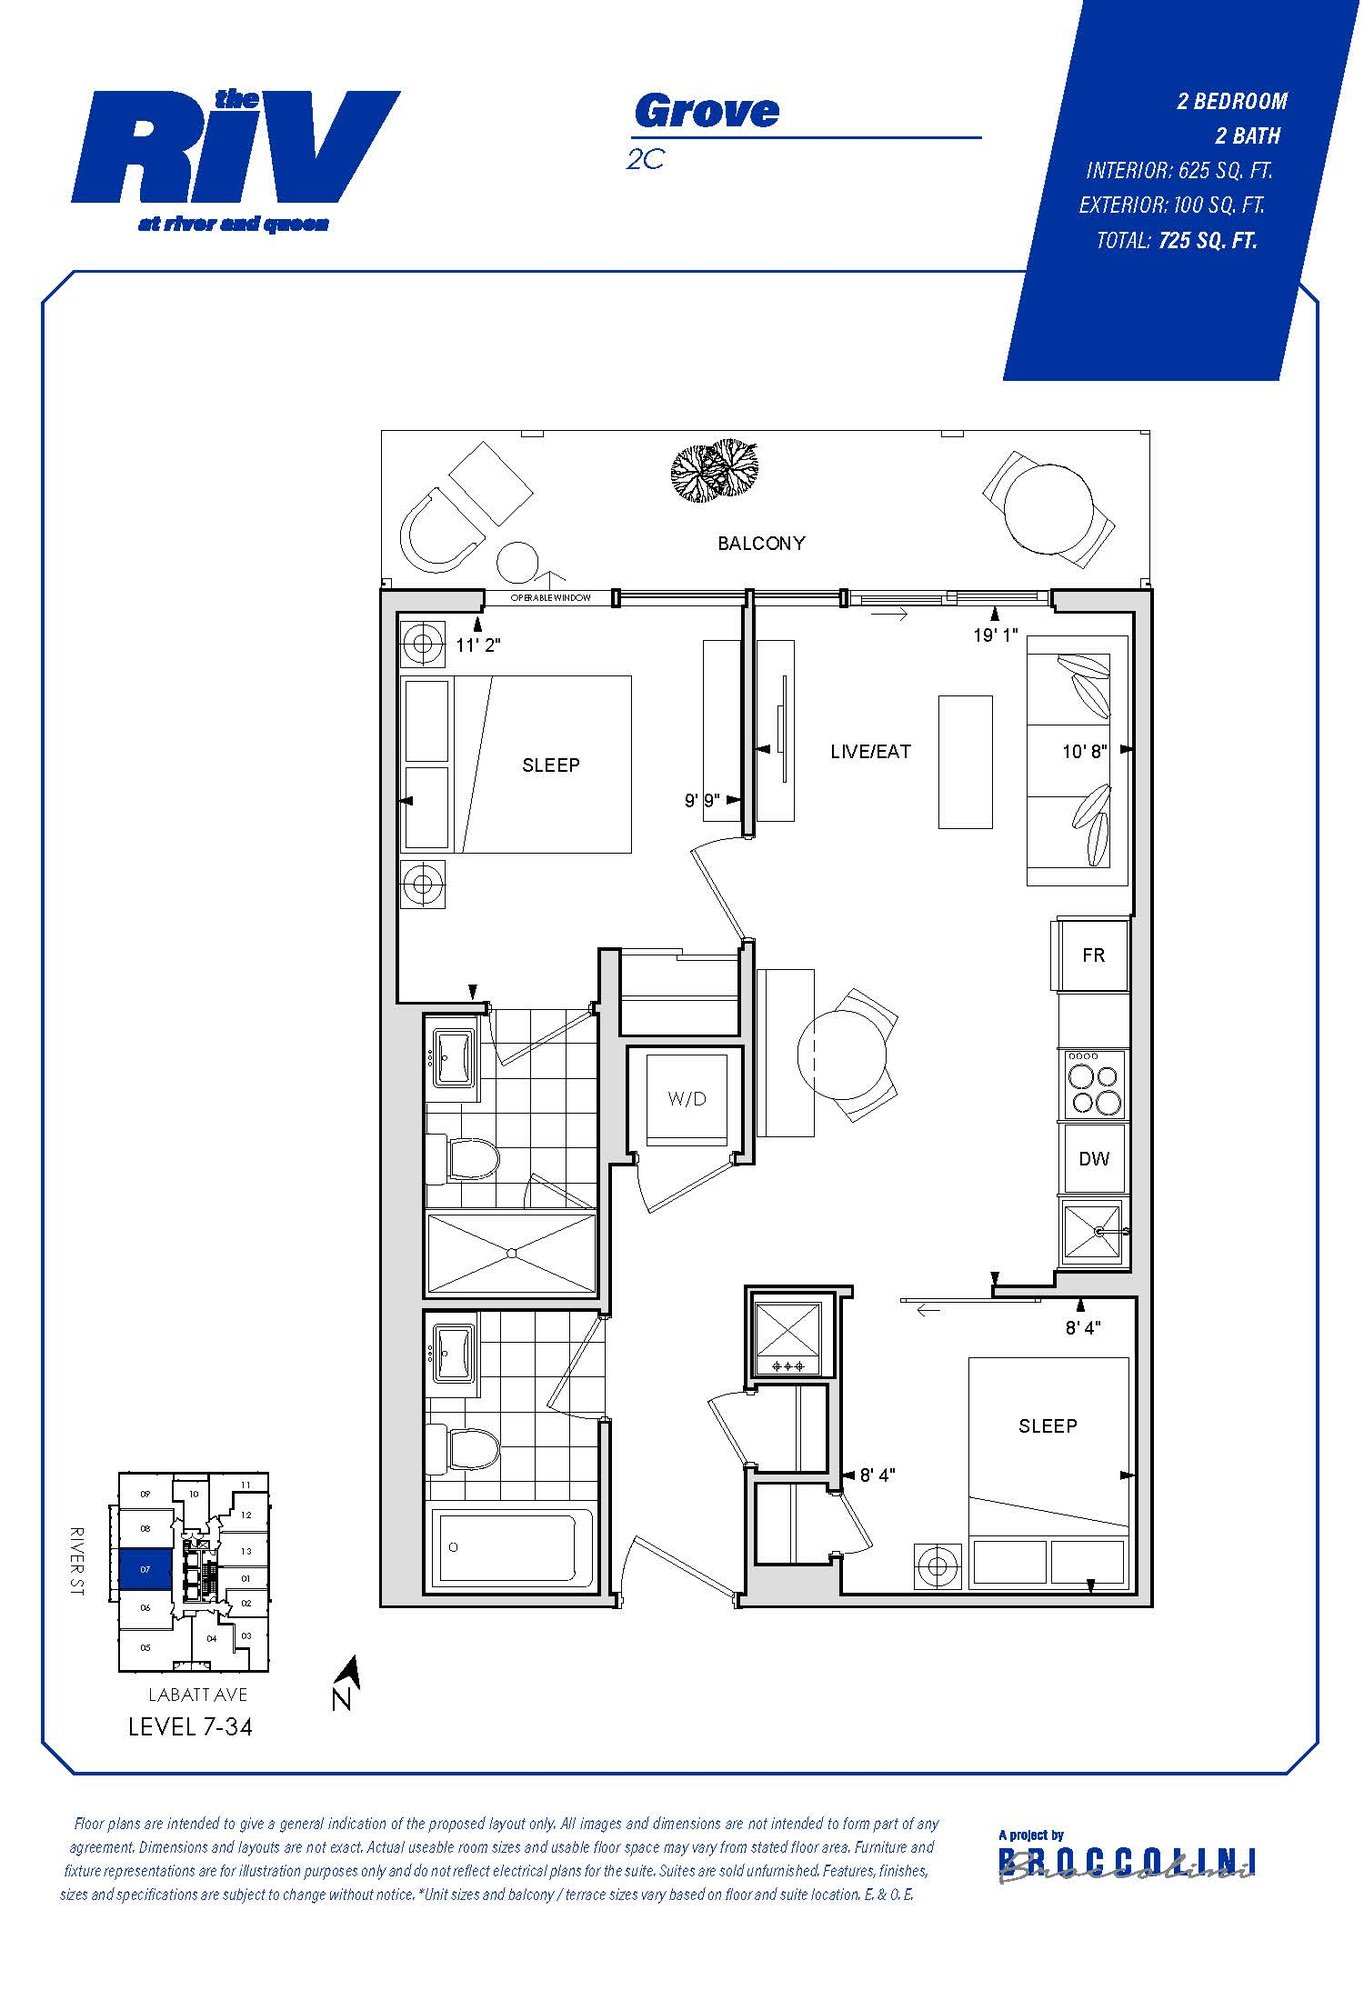 Floor plan for Grove two bedroom unit in The Riv